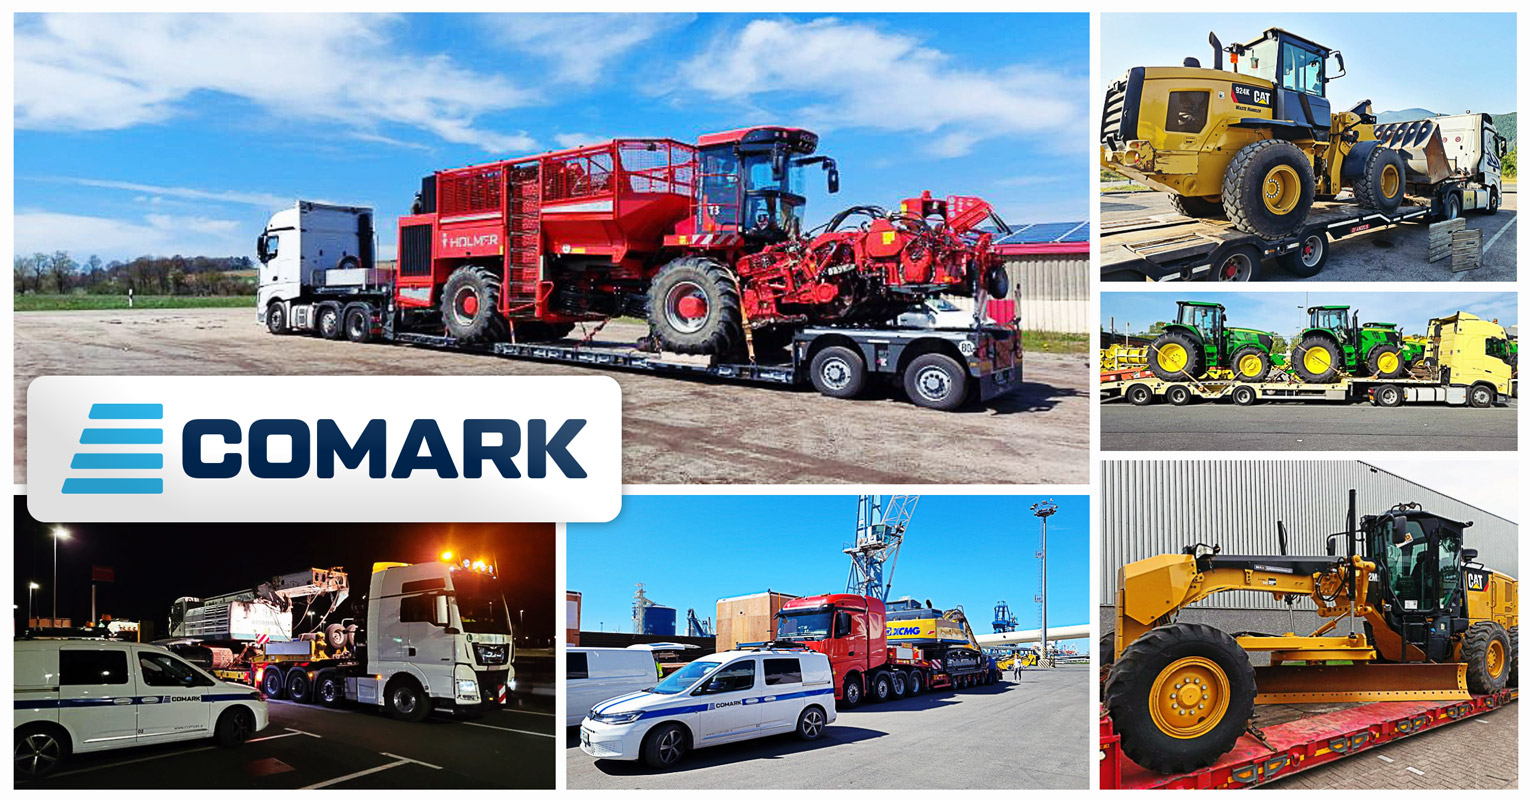 Comark - Project Logistics Shares Recent Heavy Machinery Movements Securely & Safely Loaded on Special Trucks